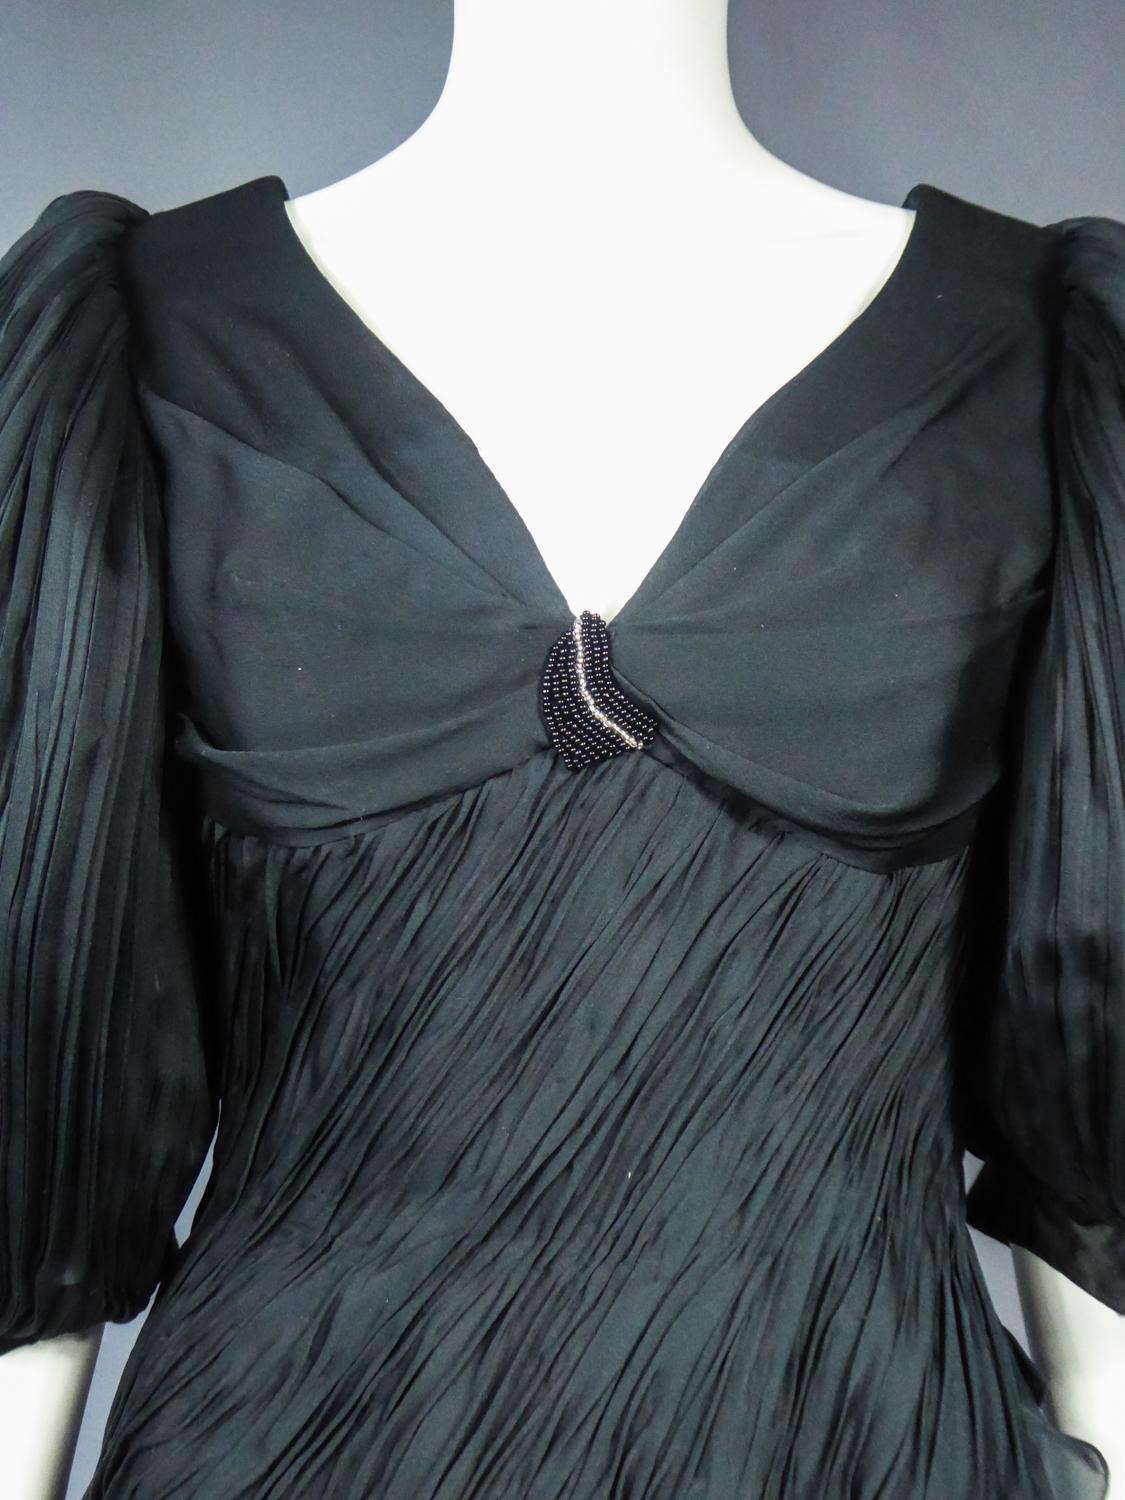 An Emanuel Ungaro French Evening Dress Numbered 295-5-85 Circa 1985/1990 For Sale 1